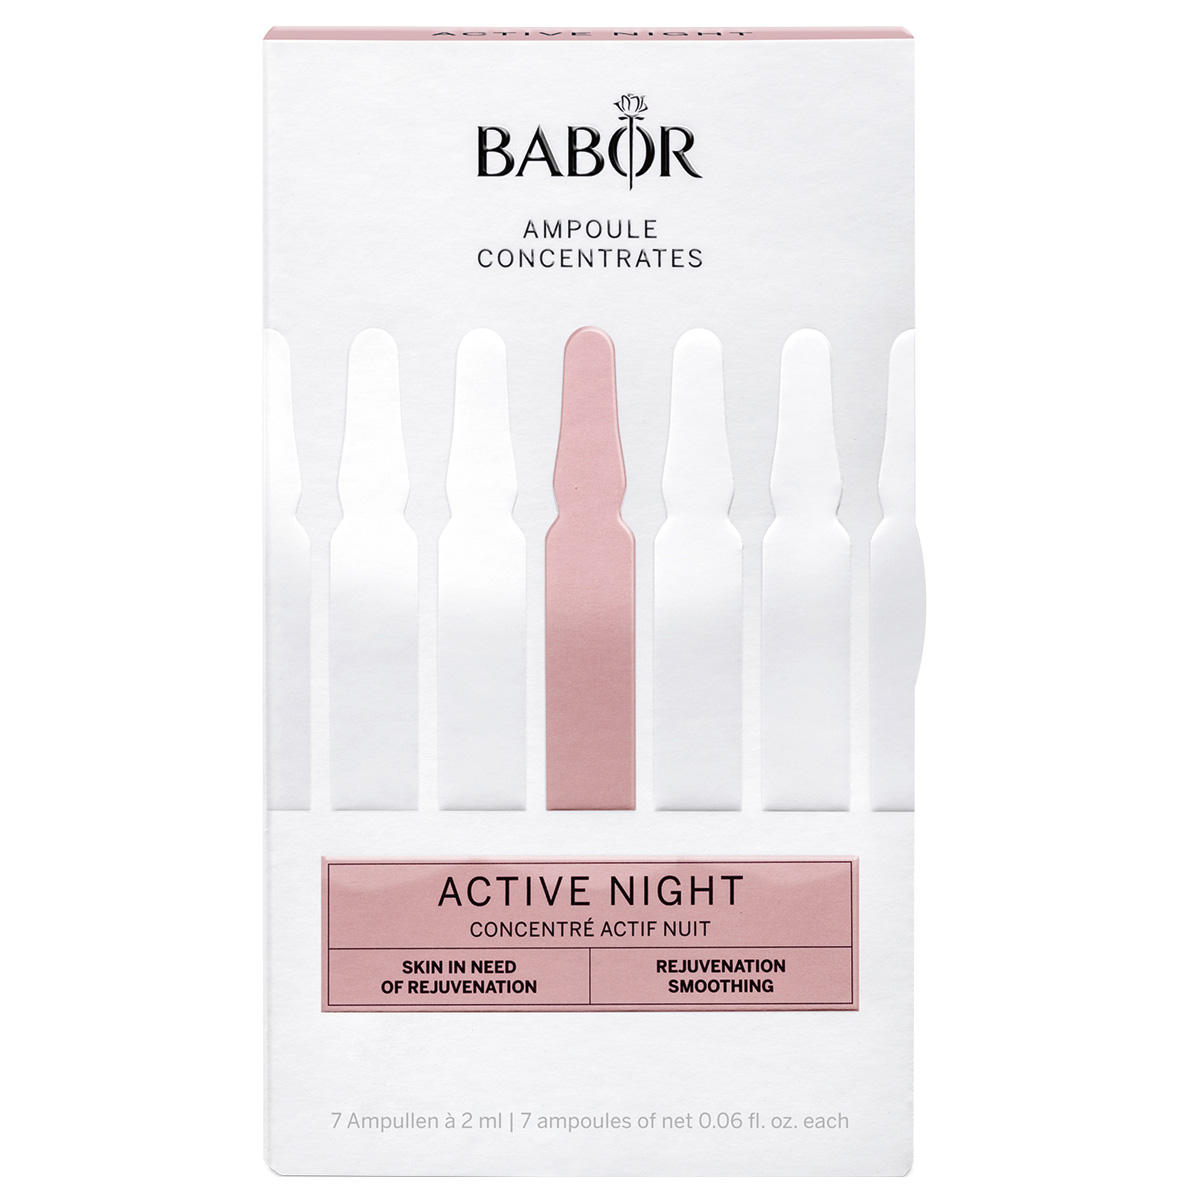 BABOR AMPOULE CONCENTRATES Active Night 7 x 2 ml - 1